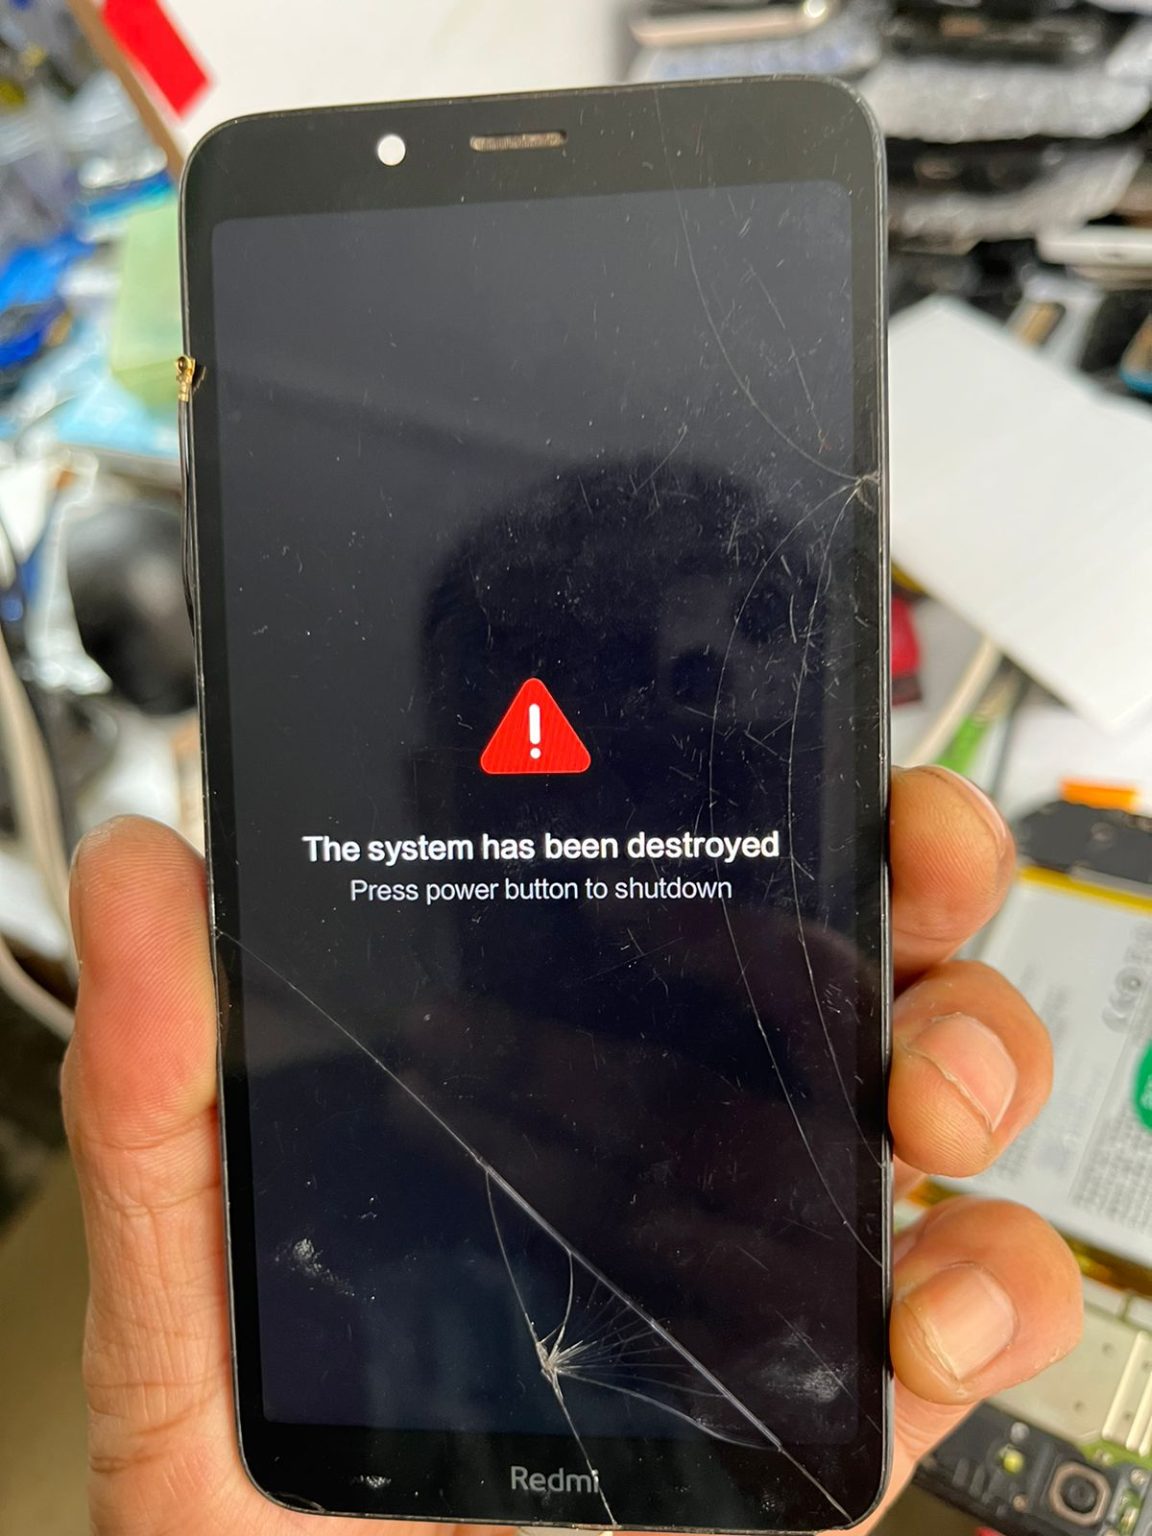 System has been destroyed redmi. Redmi the System has been destroyed. The System has been destroyed Xiaomi. Xiaomi Error. The System has been destroyed Apple.